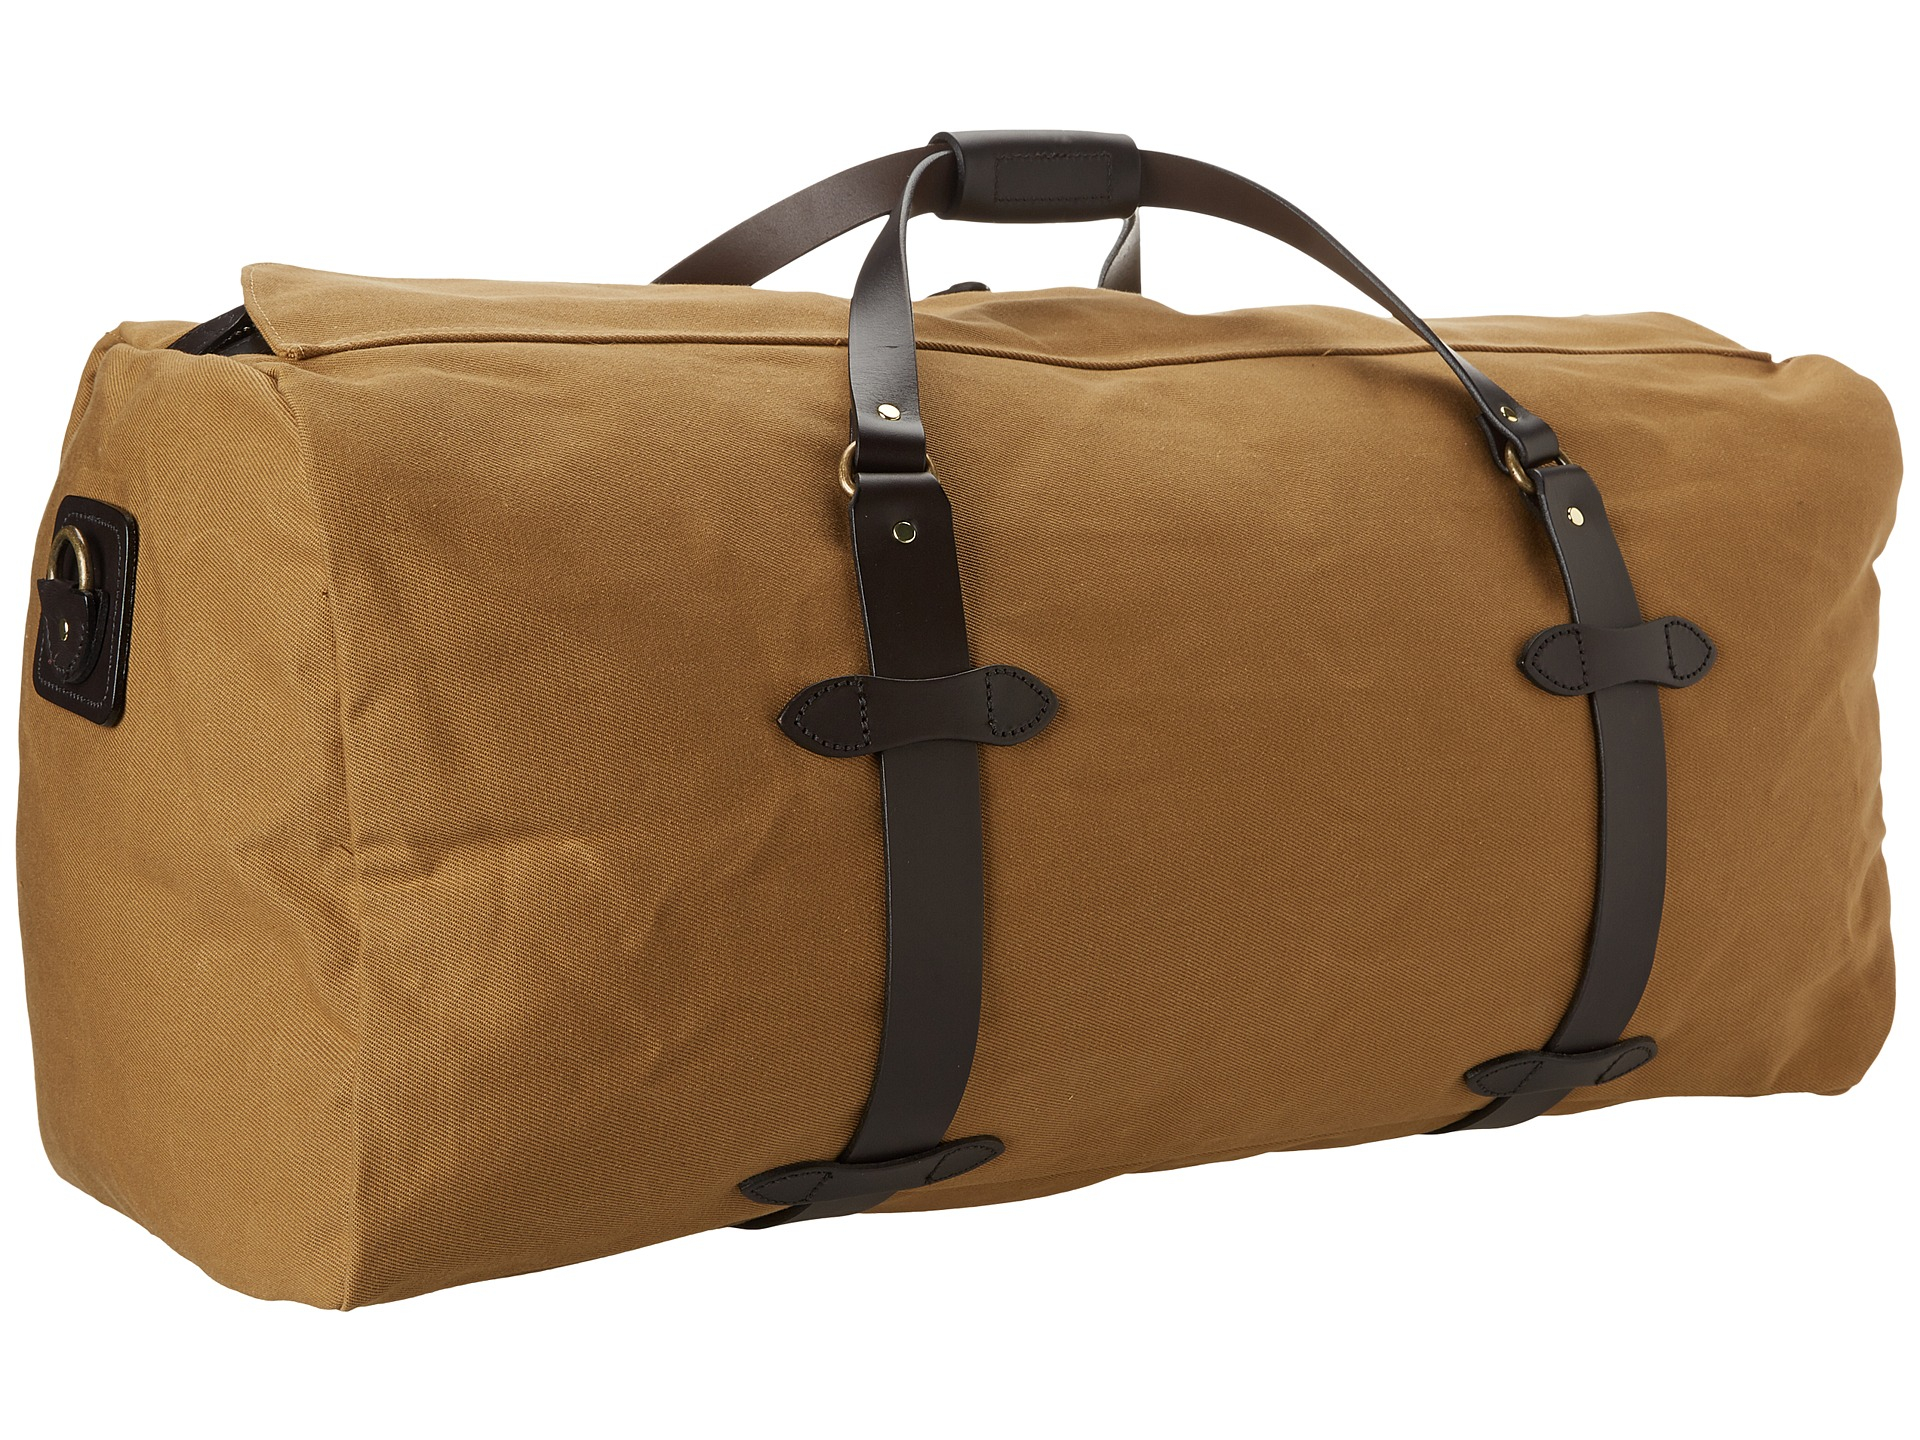 Lyst - Filson Large Duffle Bag in Brown